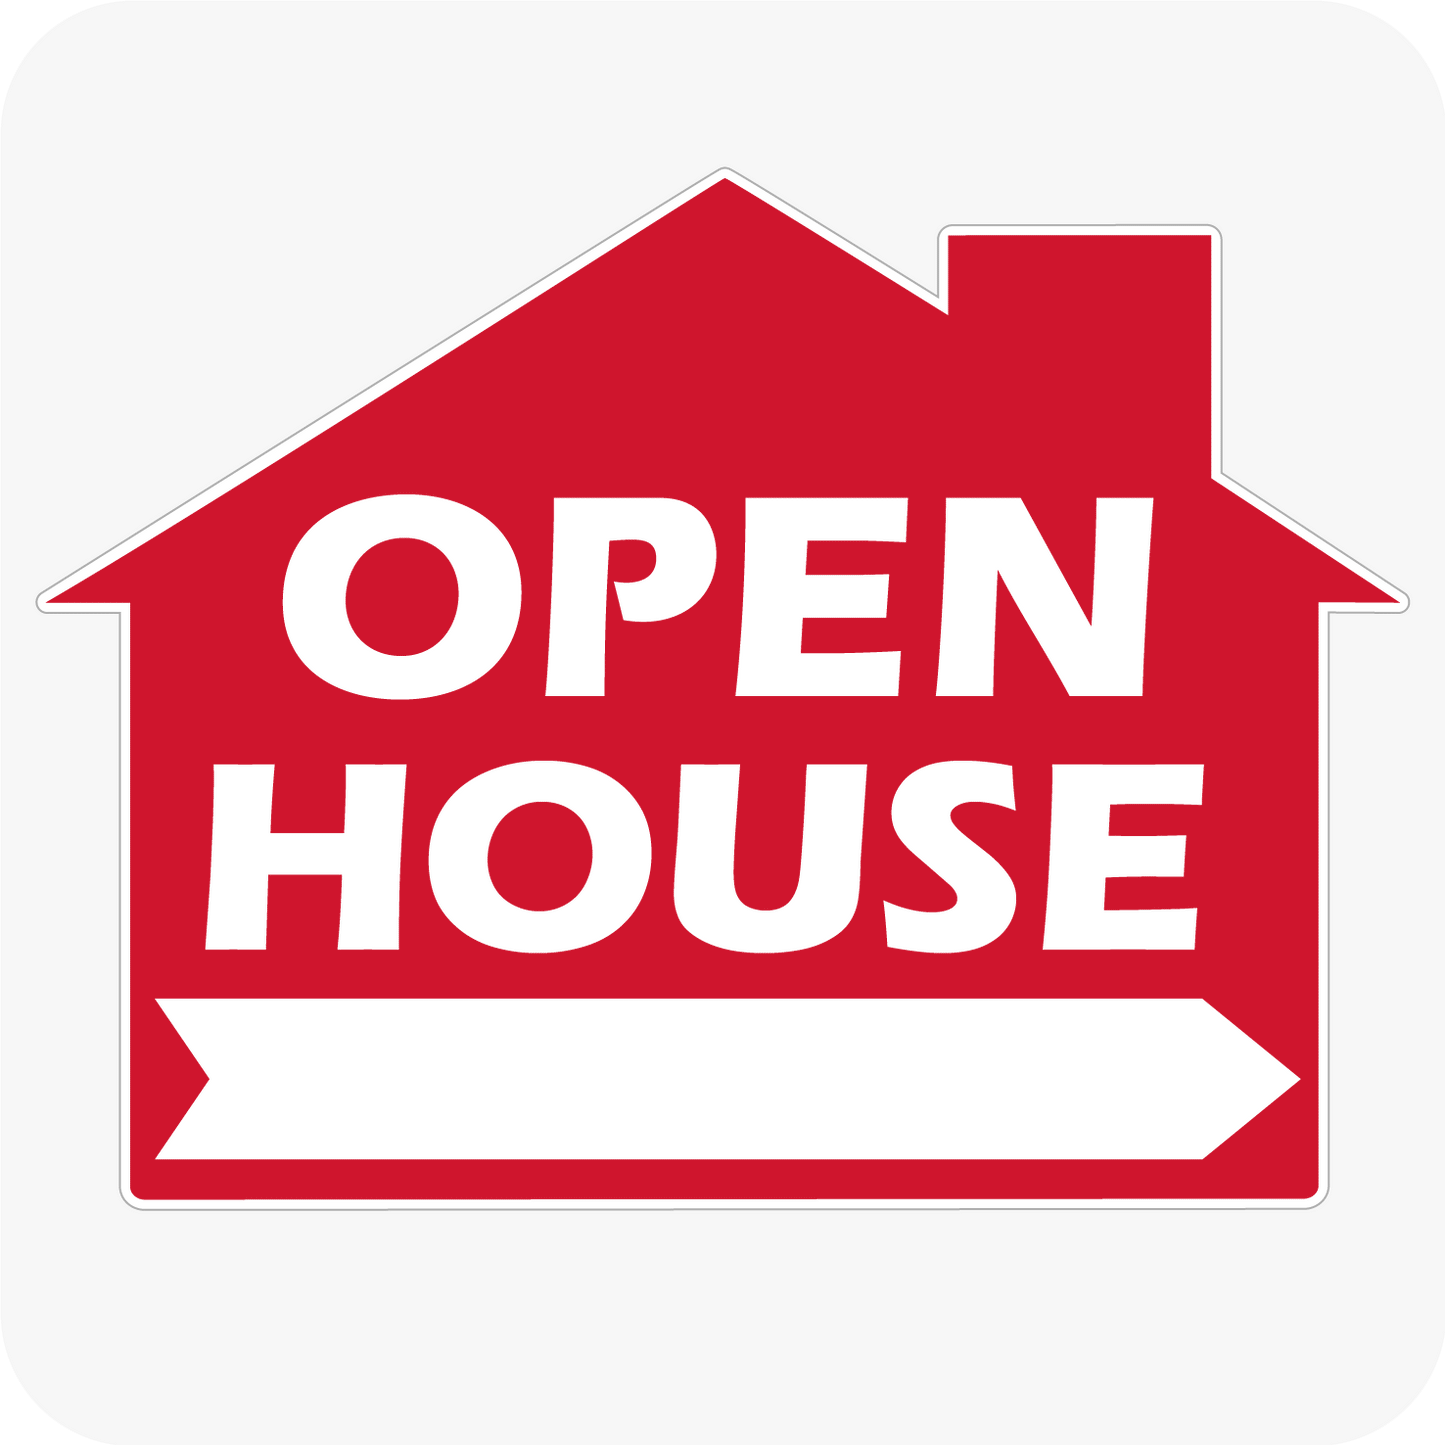 Open House House Shaped Sign 18 x 24 - Red